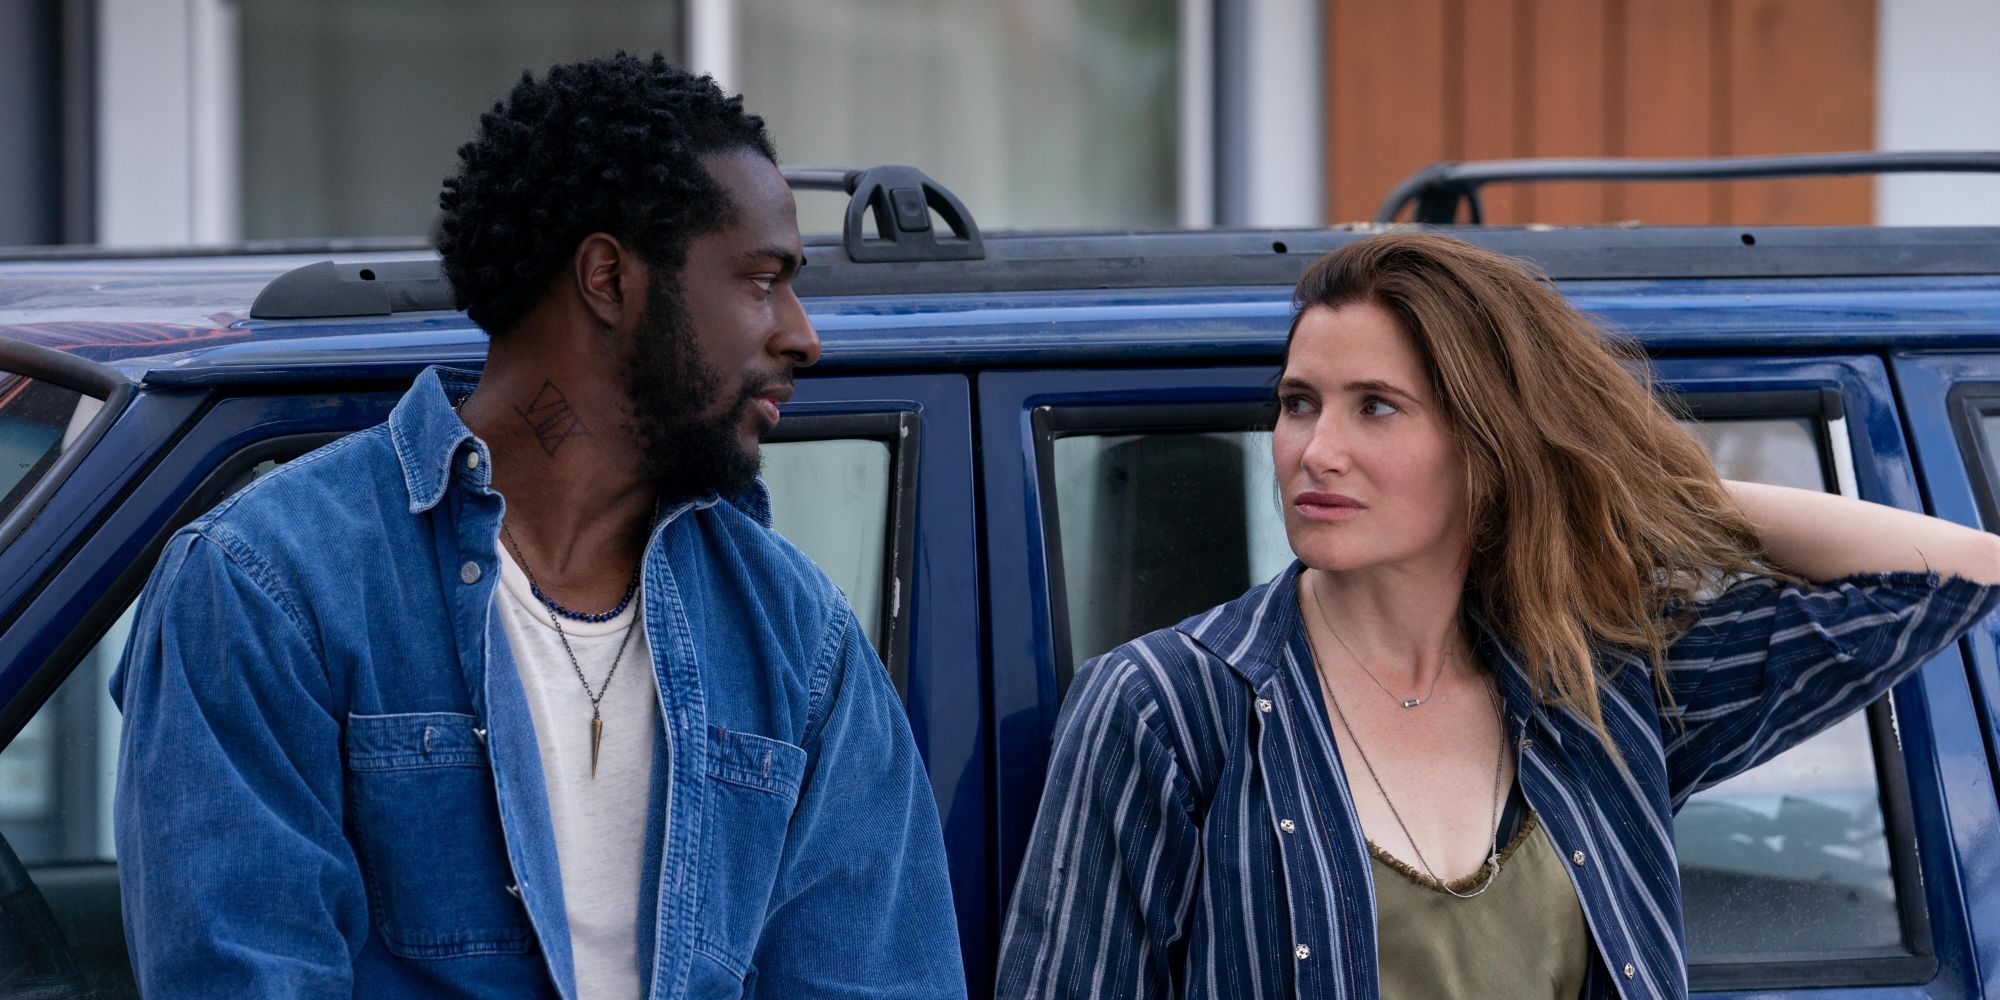 'Tiny Beautiful Things' Kathryn Hahn Discusses Author in New Featurette